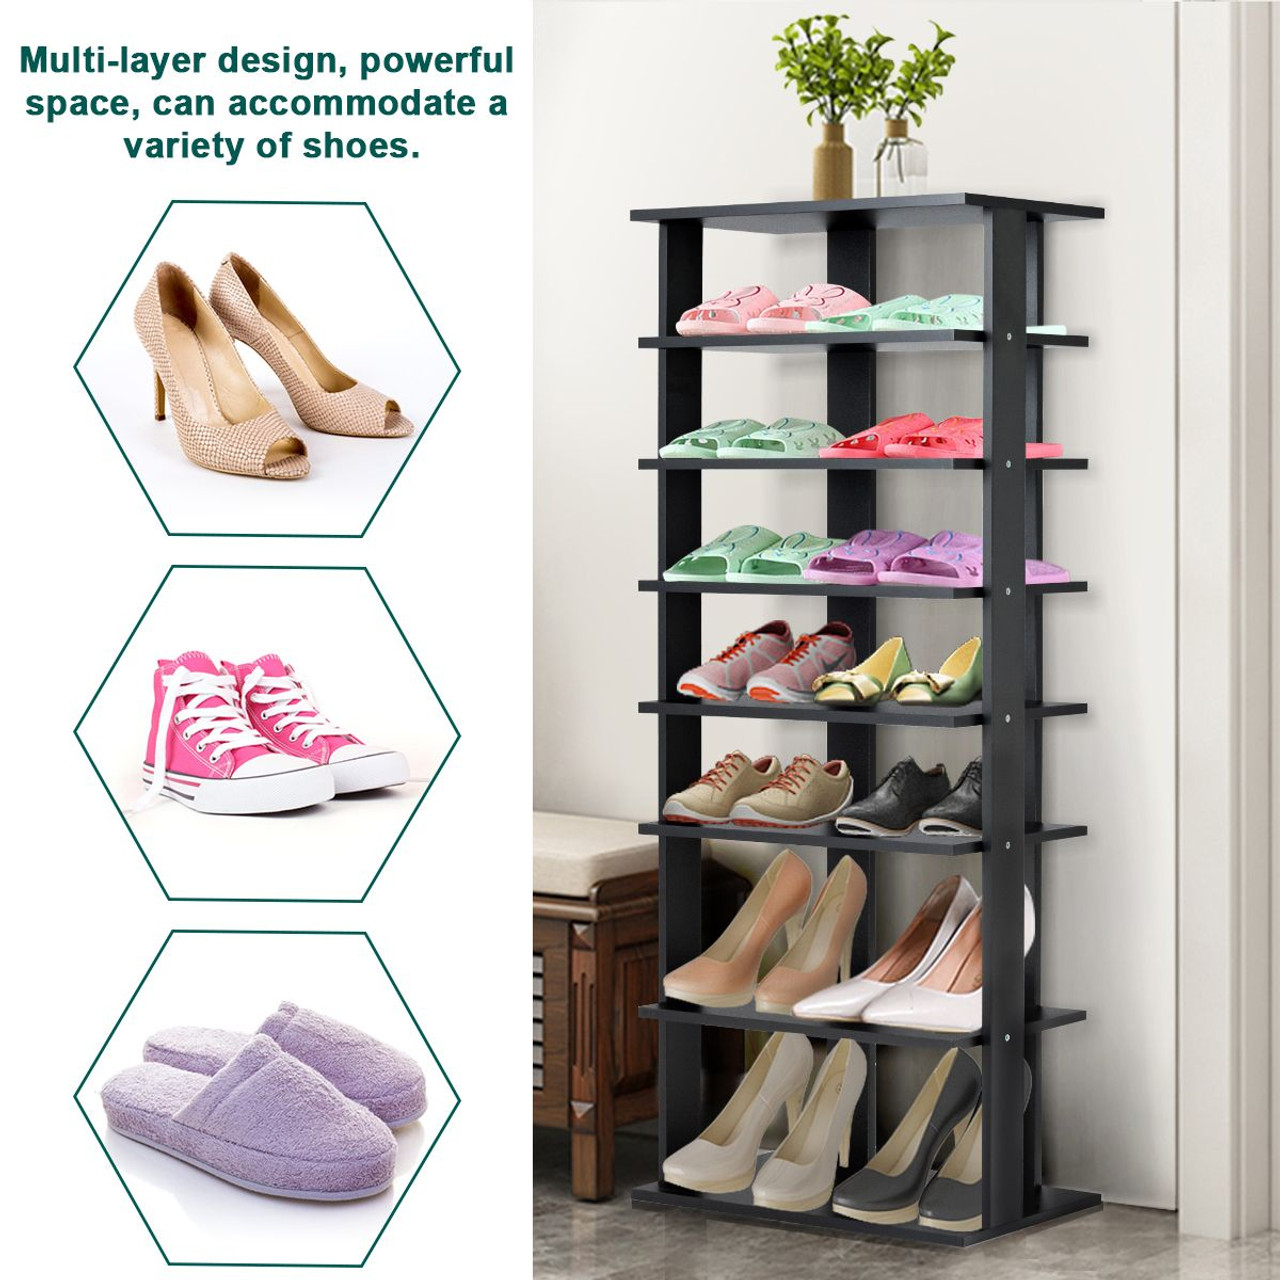 7-Tier Dual Shoe Rack with Practical Free-Standing Shelves  product image